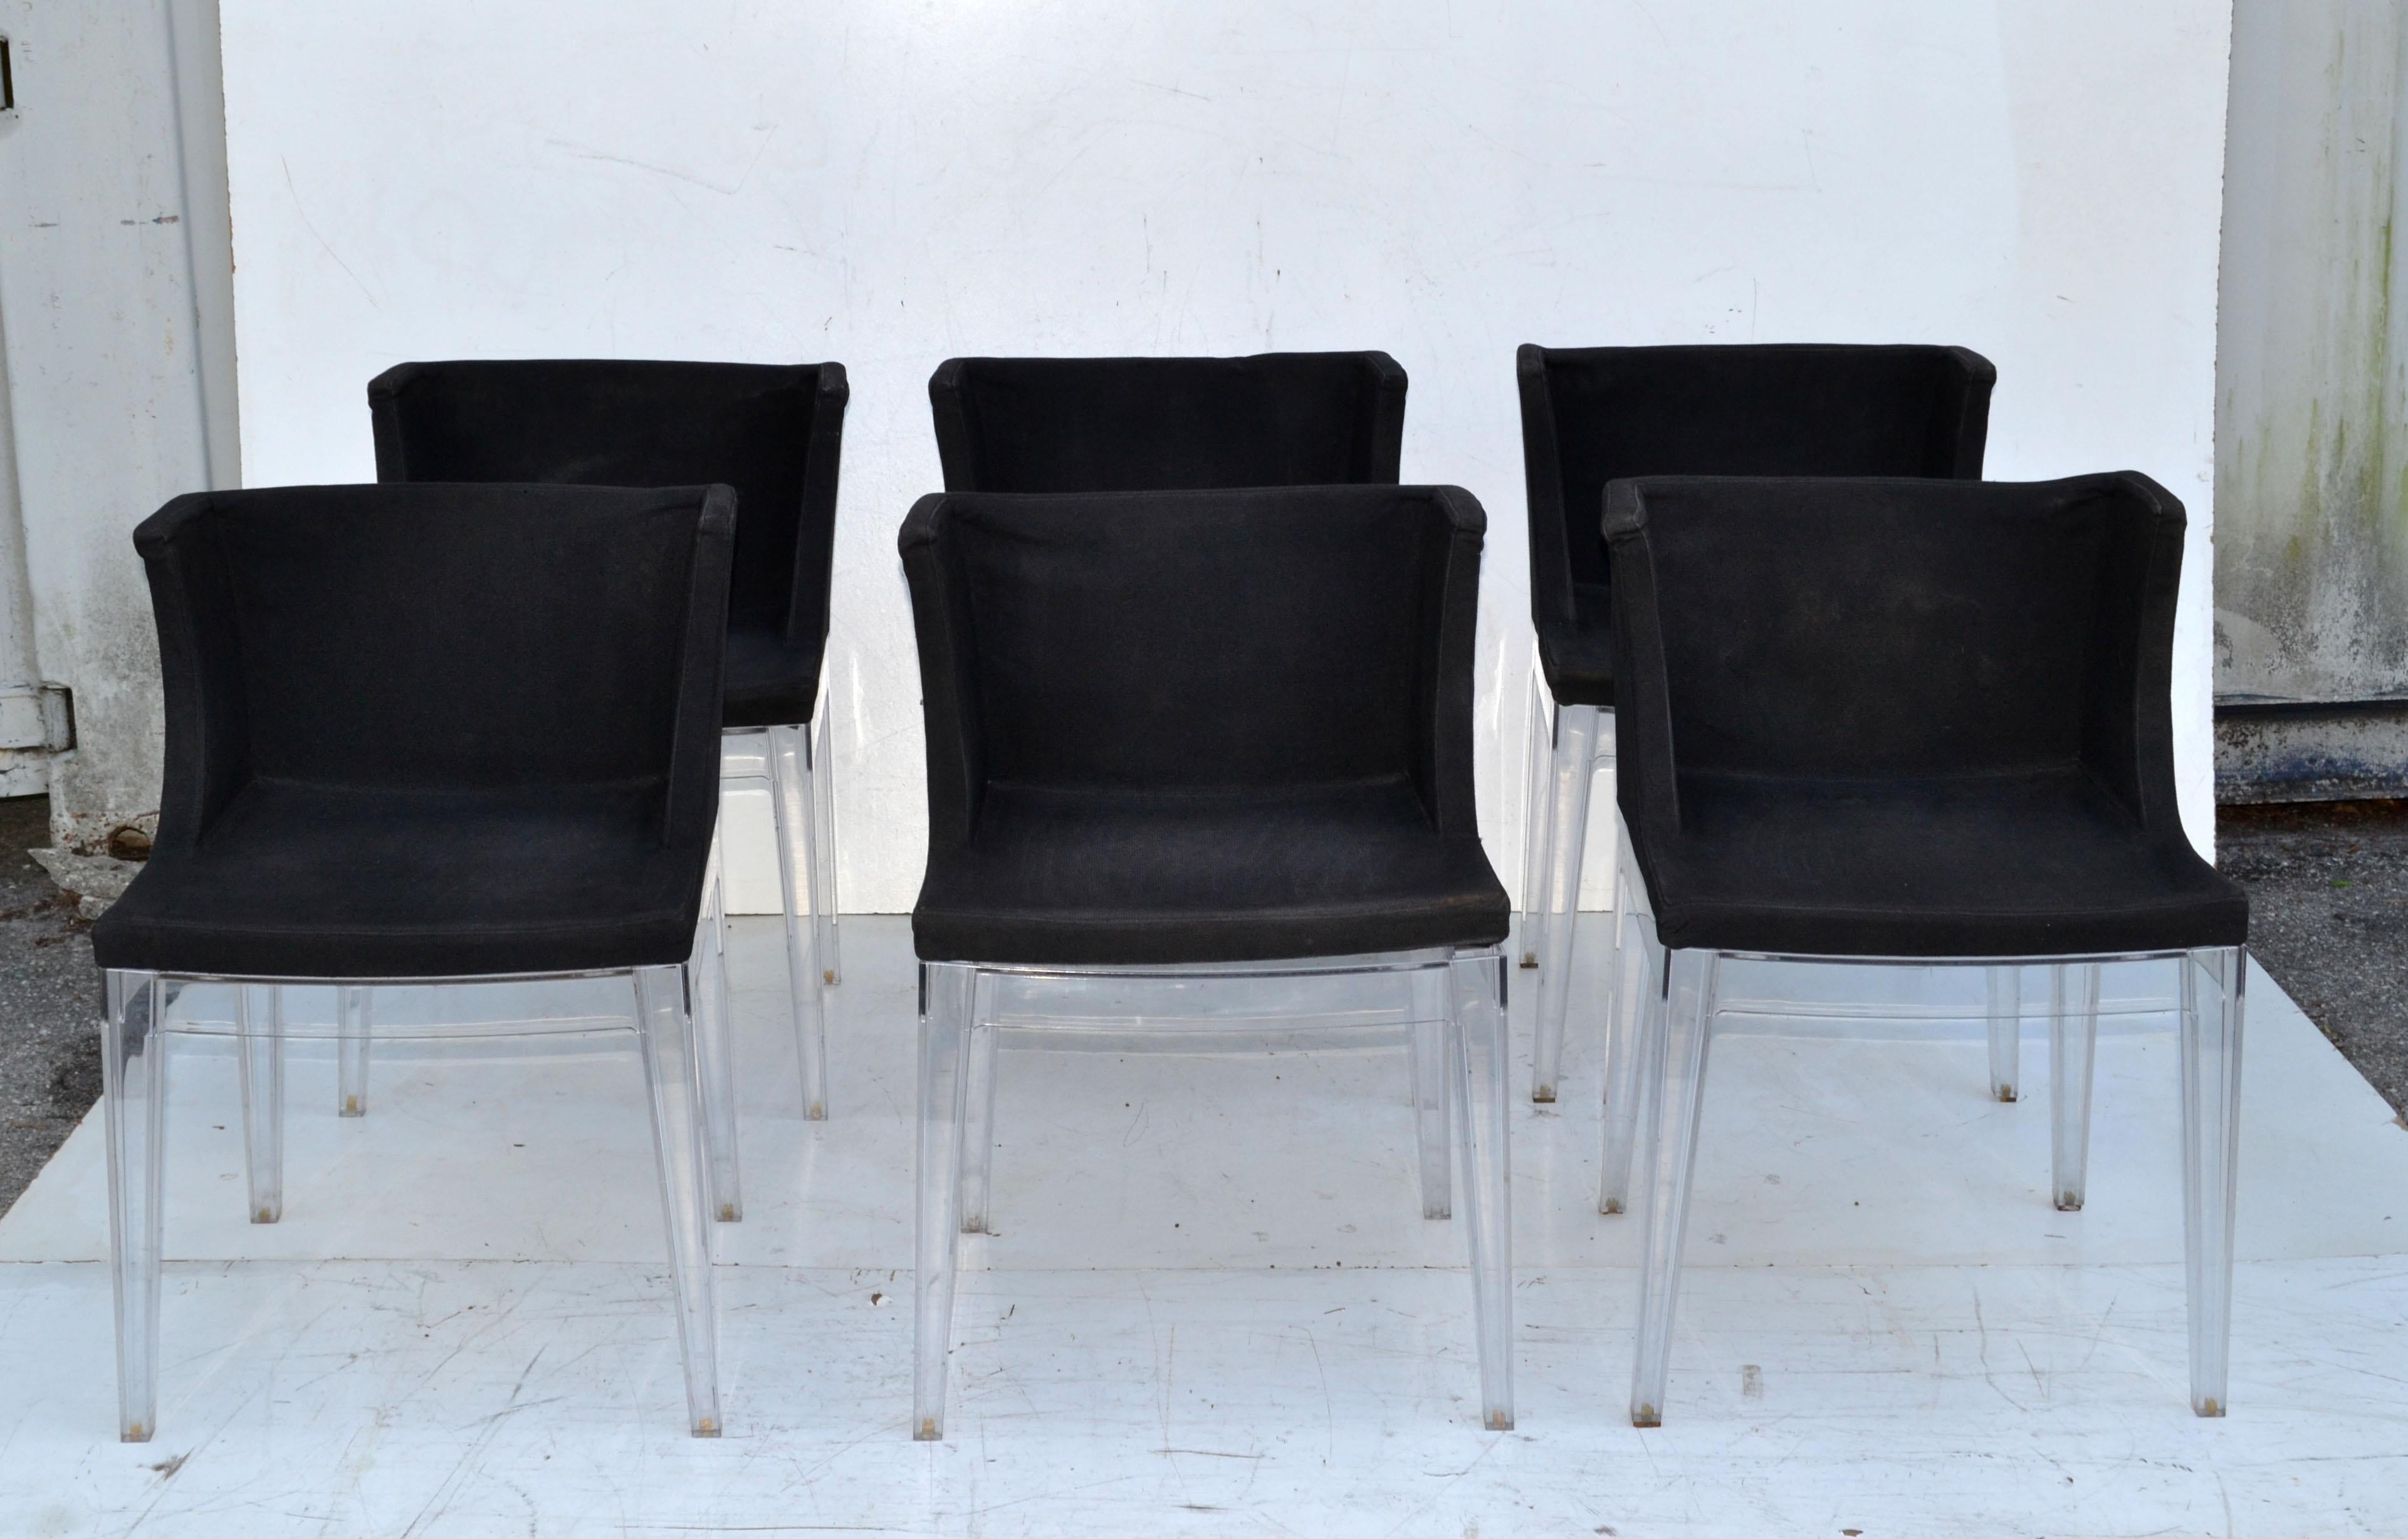 Vintage Set of 6 Mademoiselle dining or armchairs in the original black cotton upholstery and with transparent Lucite frames.
Designed by Philippe Starck and made in Italy by Kartell in the 1970.
All original condition with wear to the foot glides